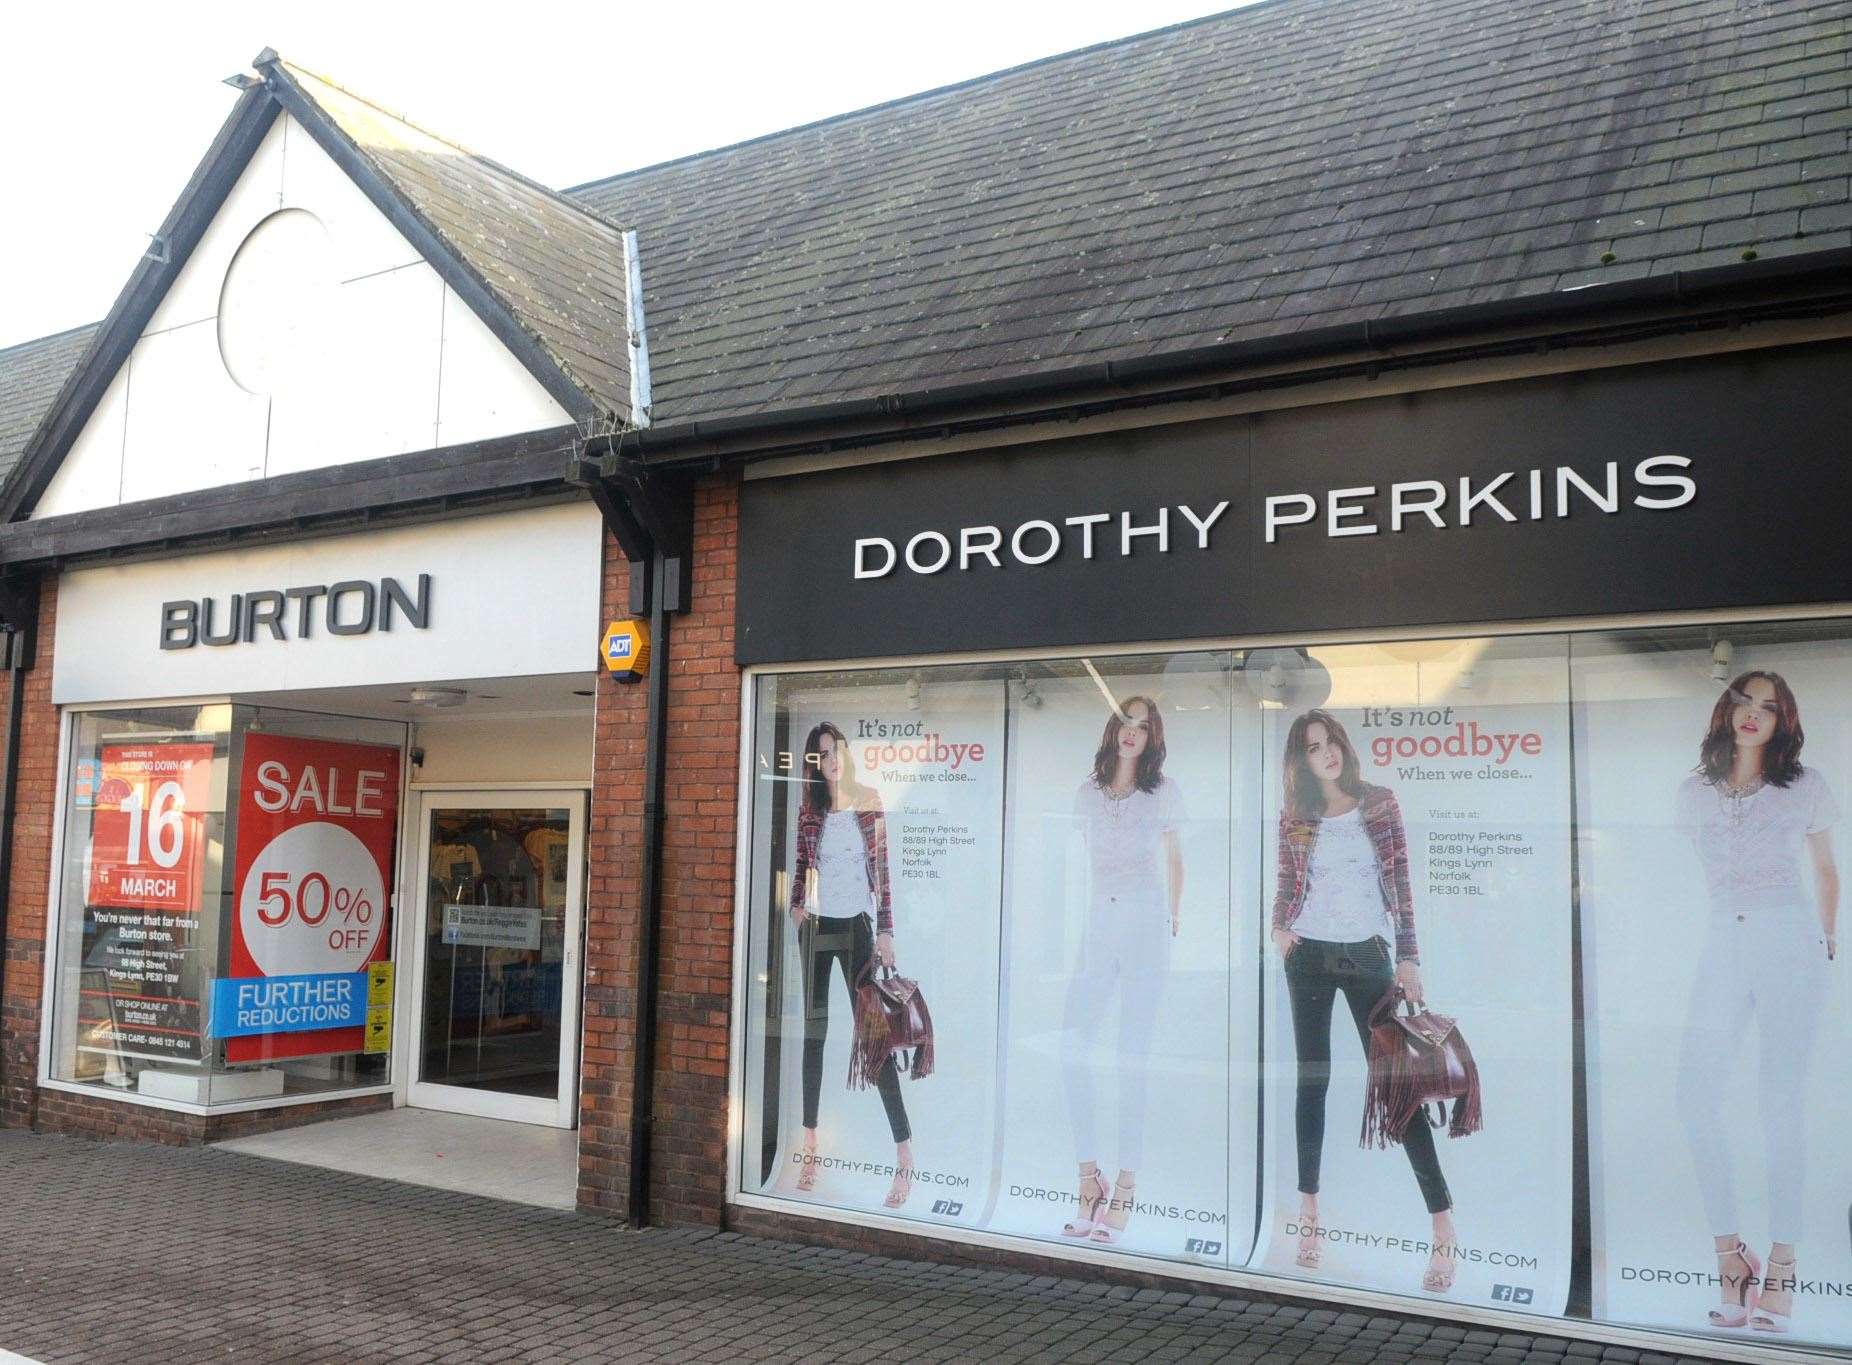 Arcadia owns the likes of Topshop and Dorothy Perkins